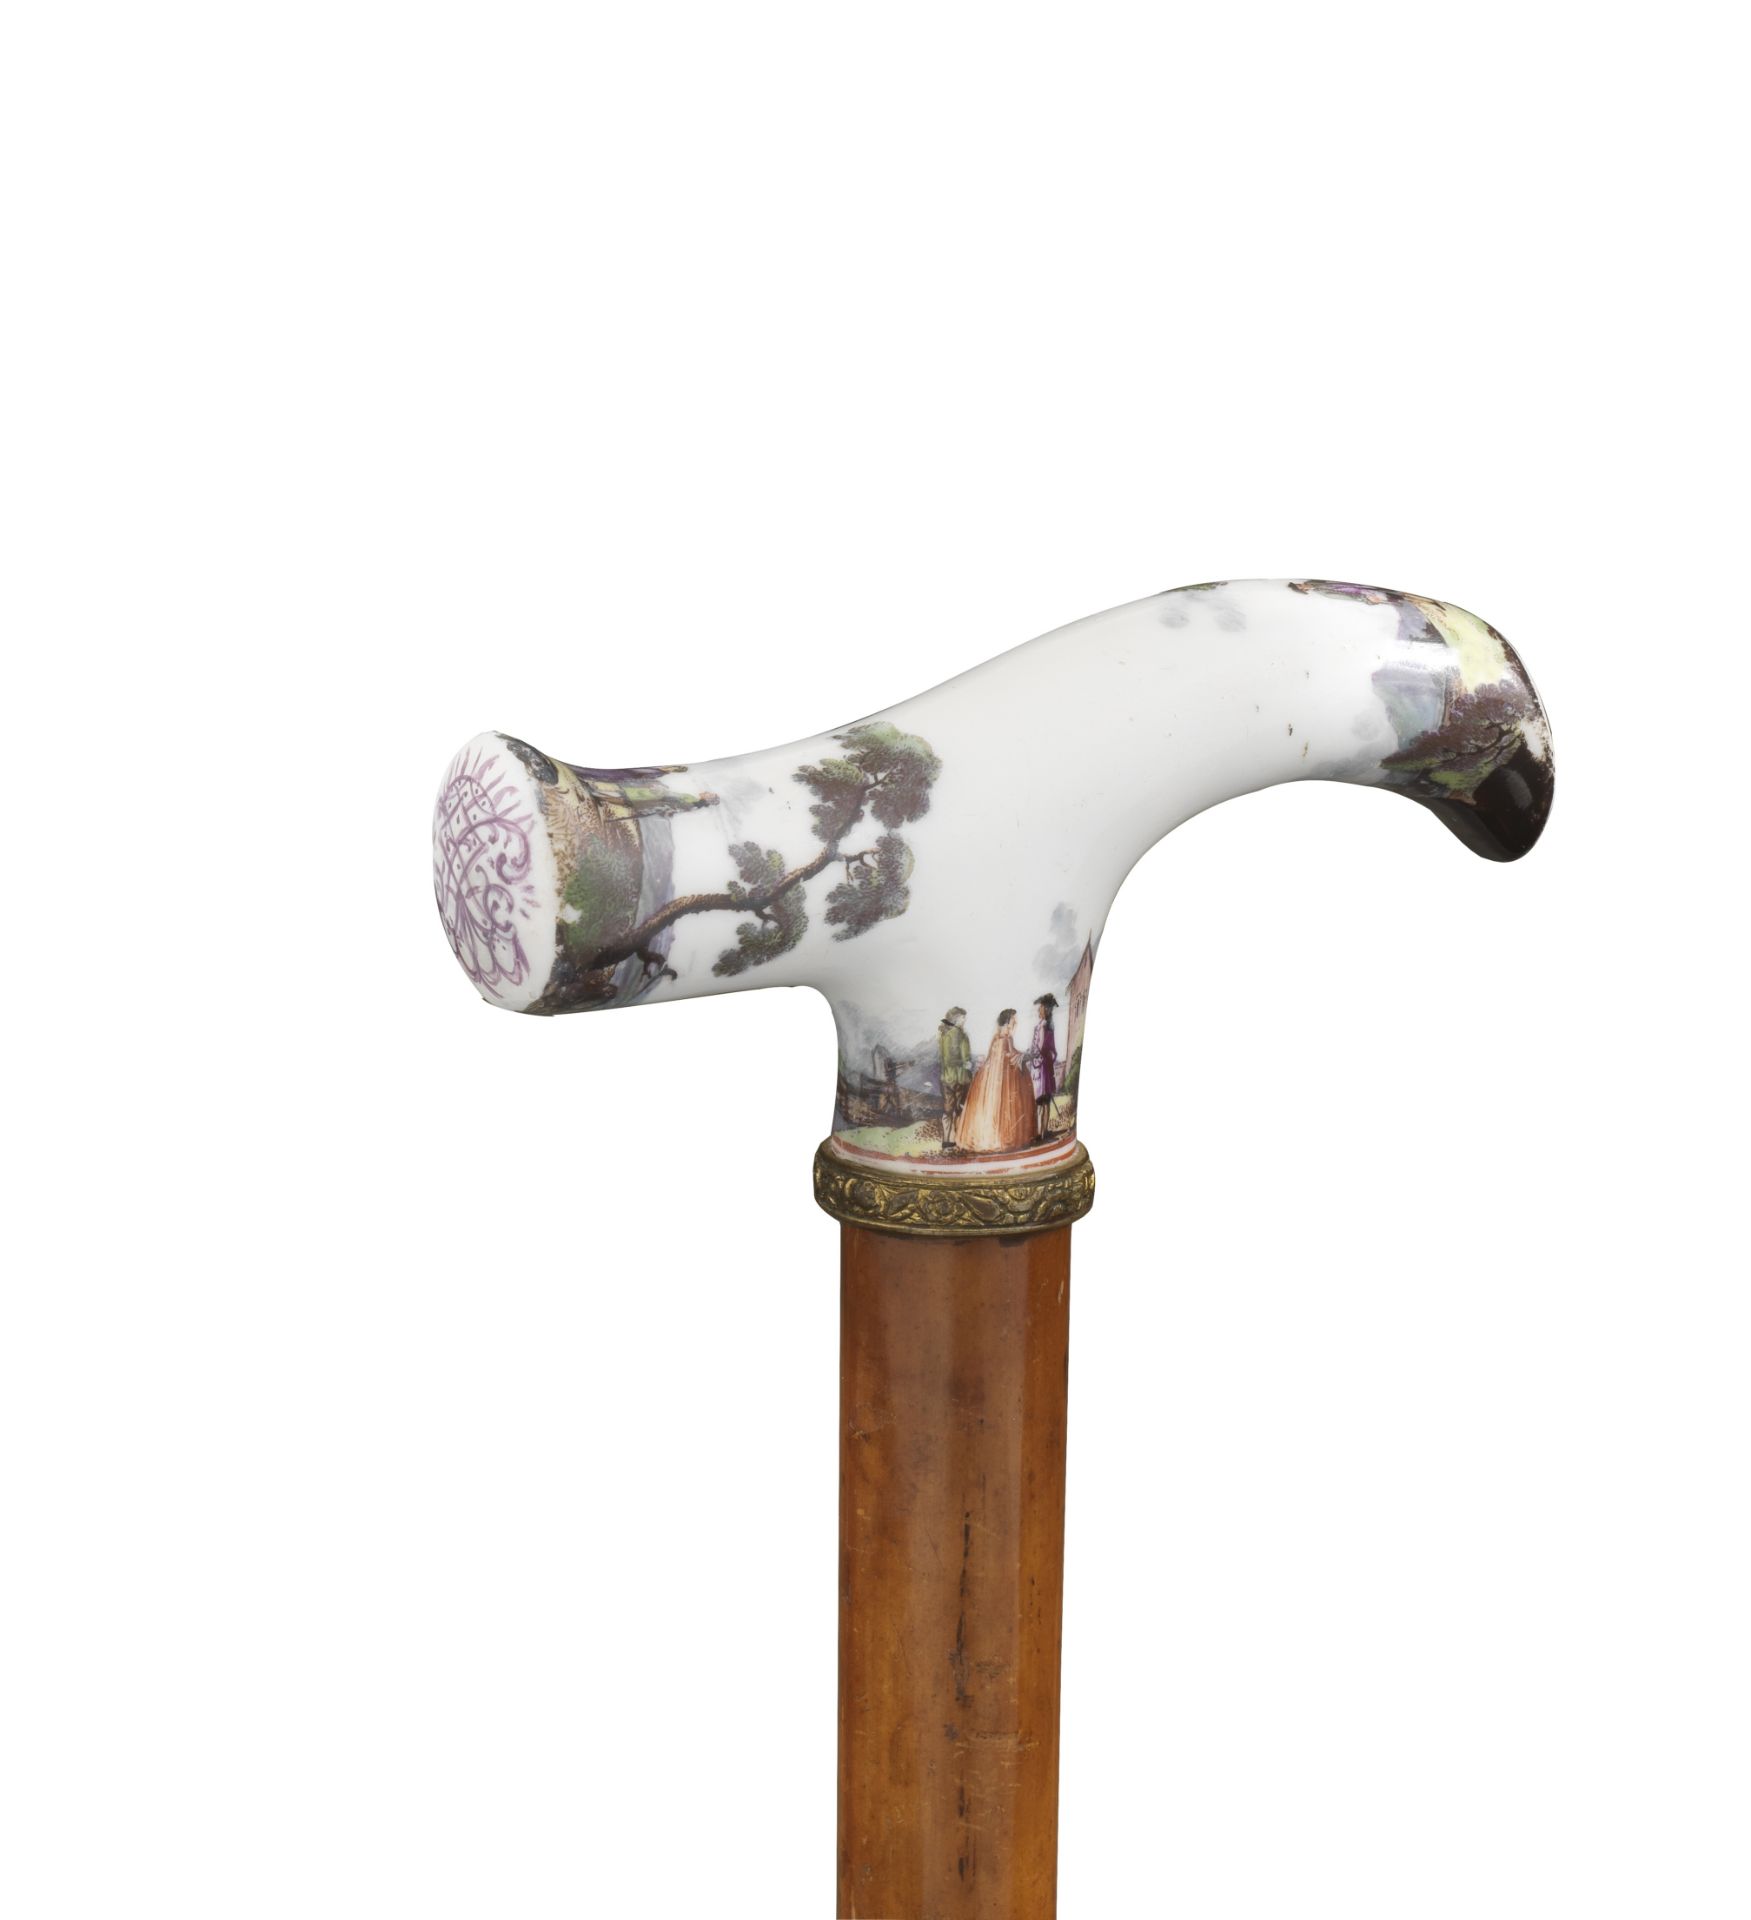 A Meissen cane handle decorated with European landscapes, mid 18th century